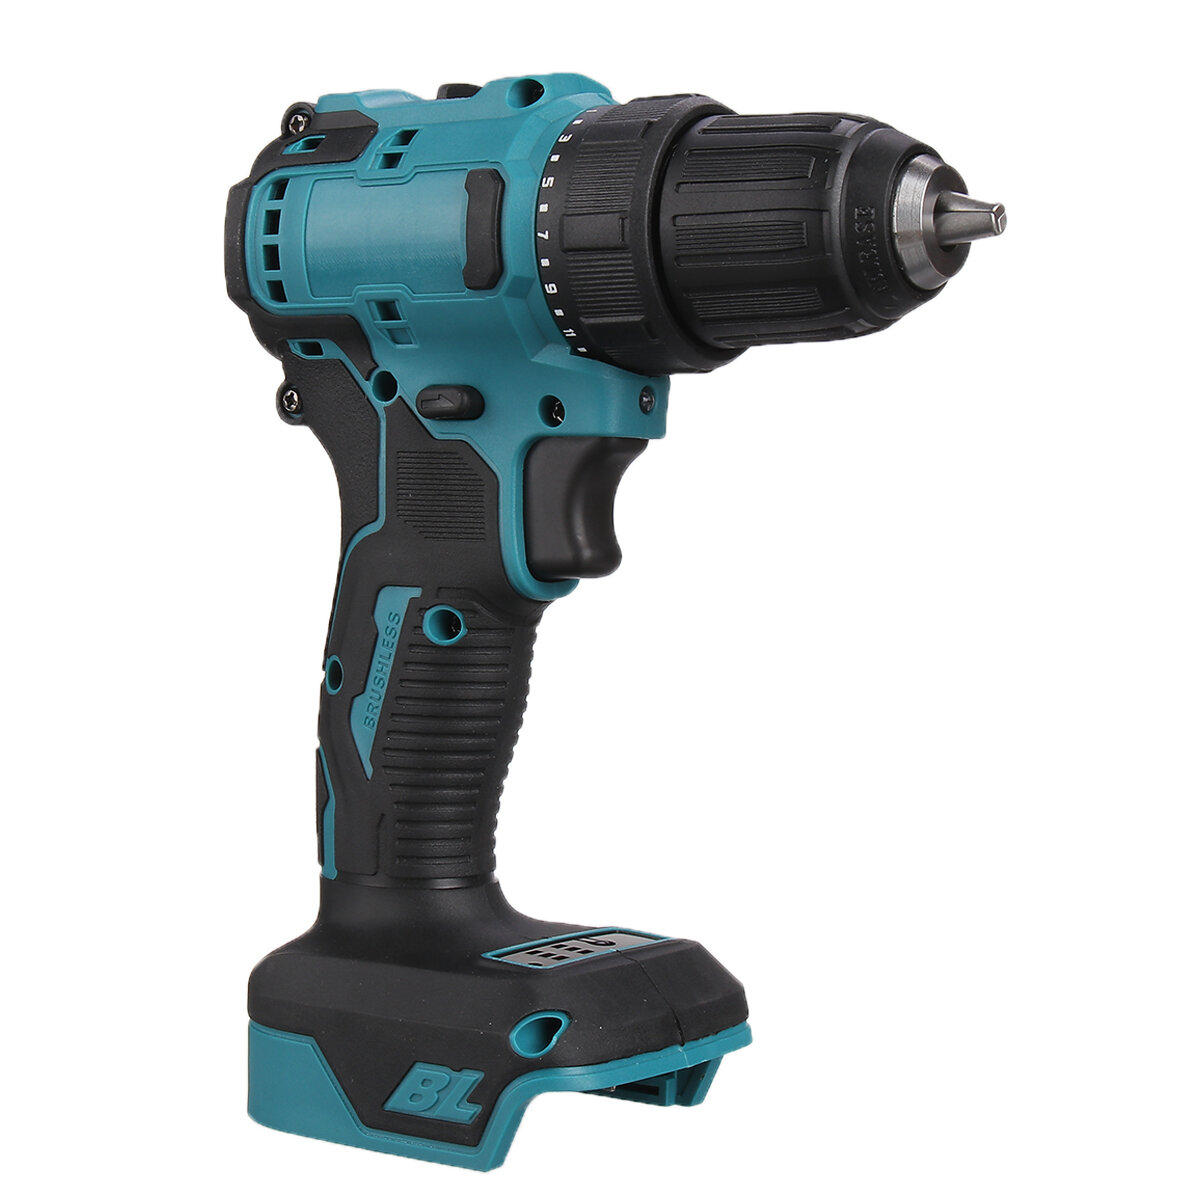 500-1800RPM Brushless Motor Delivers up to 23-48N.m of Torque Electric Drill COD